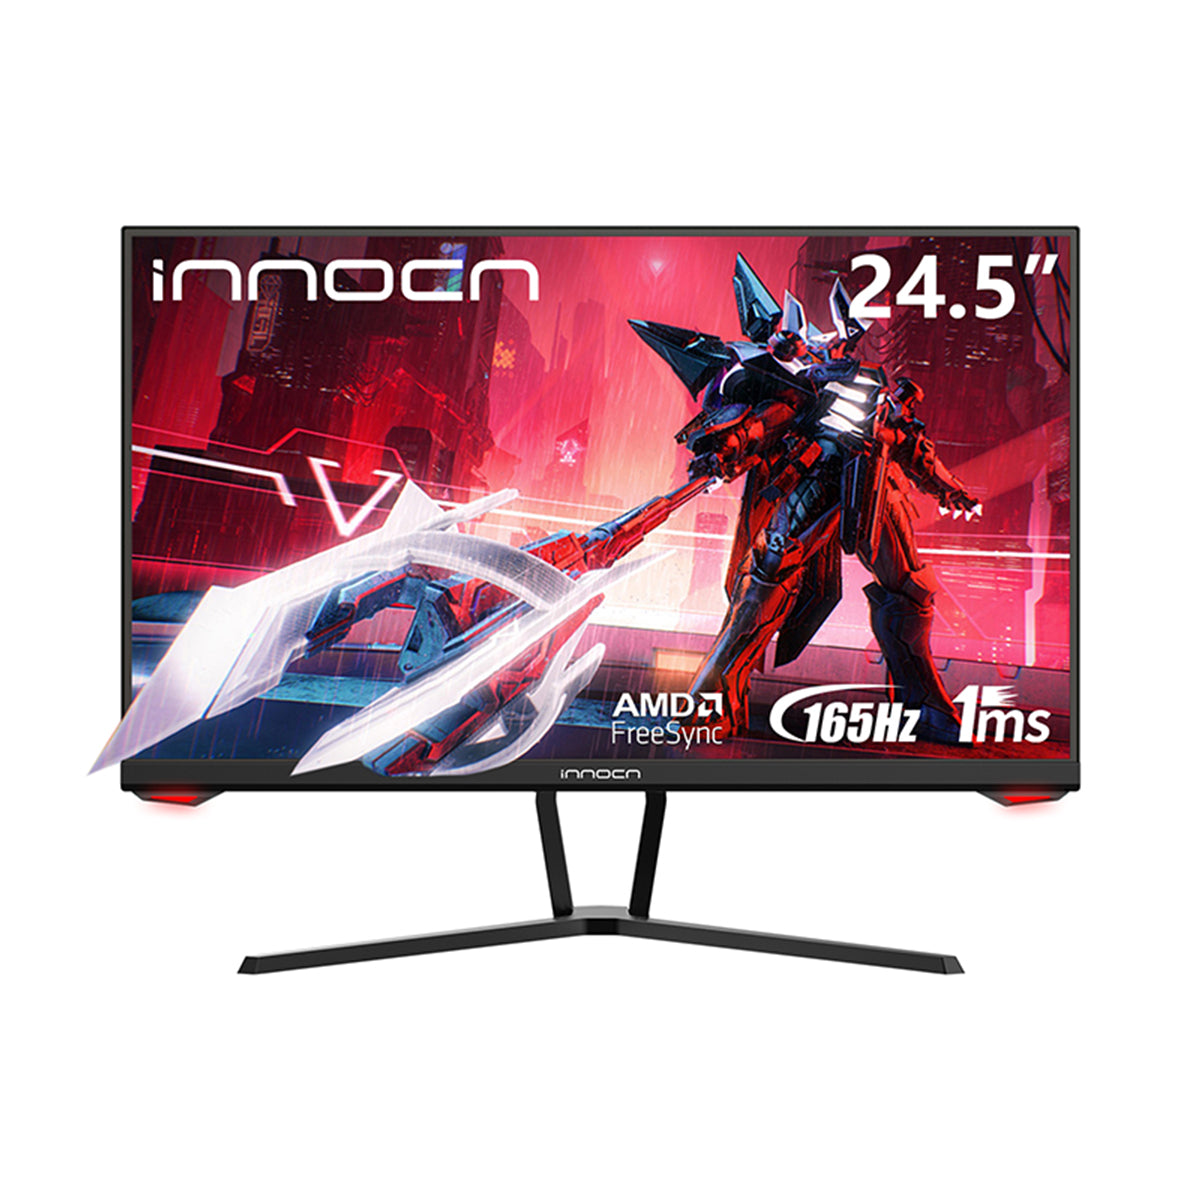 INNOCN 27G1V 27 Inch Monitor 4K 144Hz HDR400 PC Computer Gaming Monitor  G-Sync Compatible, 1MS, USB Type-C, HDMI, DisPlayPort, Height Adjustable